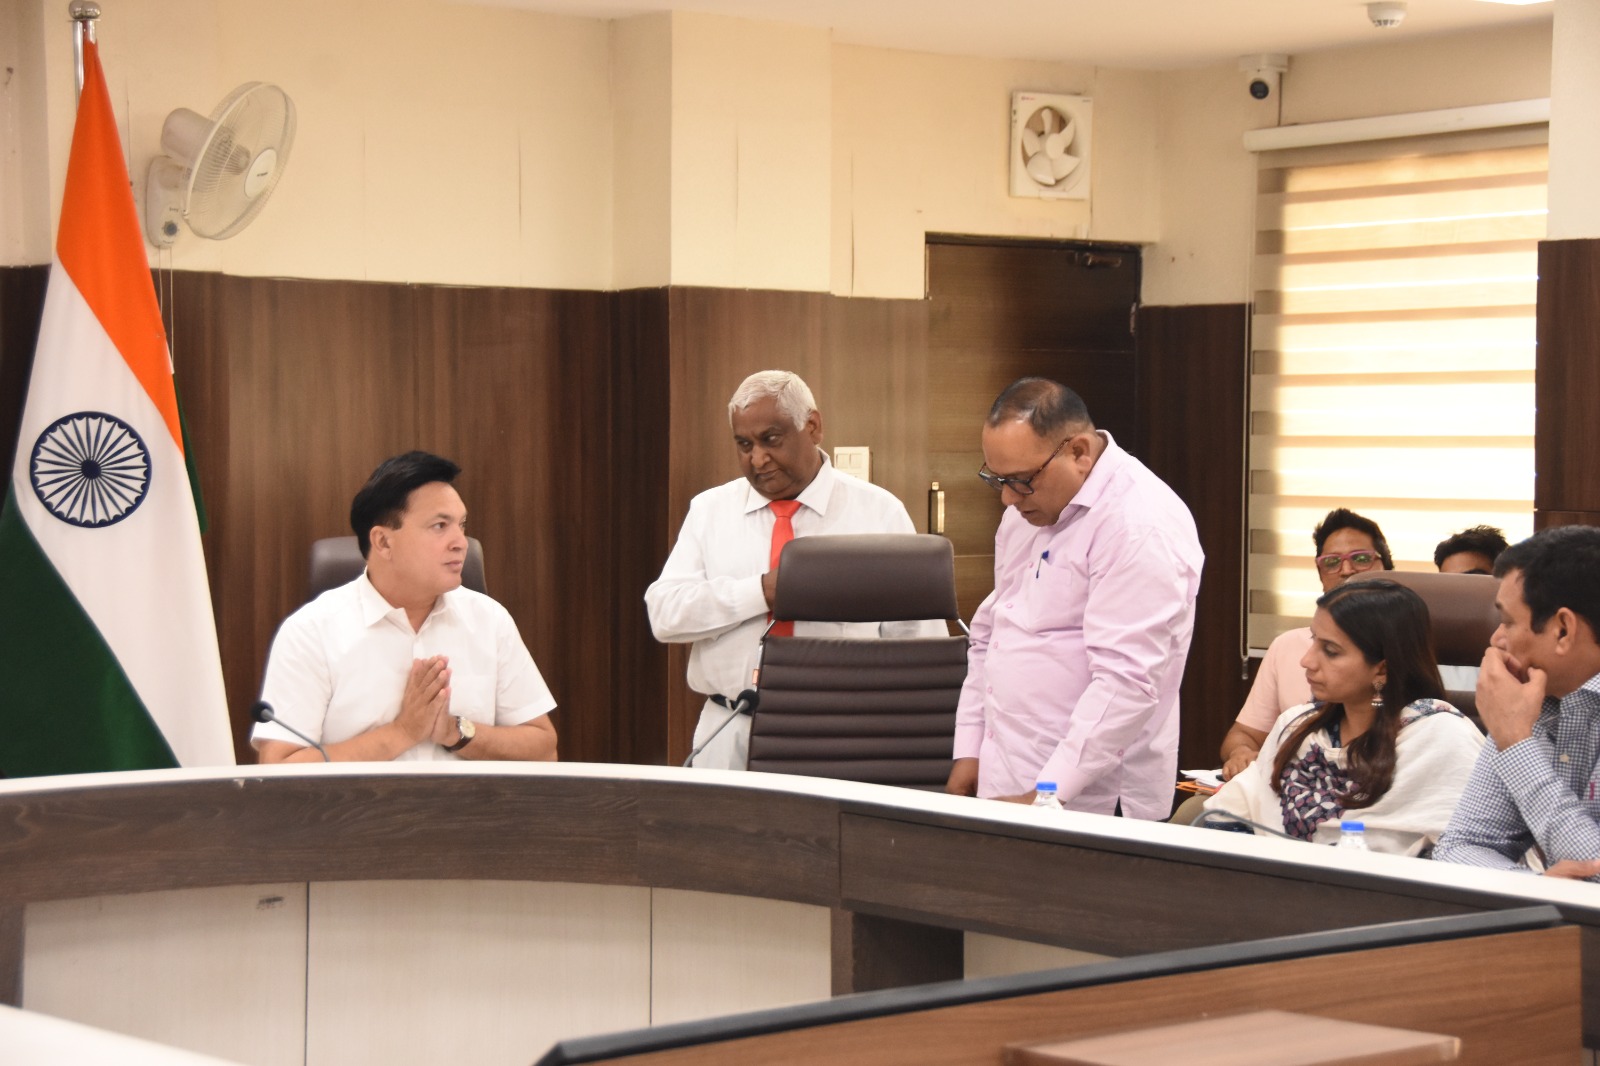 administration-is-ready-for-the-preparations-for-the-union-public-service-commission-examinations-to-be-held-on-april-21-in-faridabad-district-district-collector-vikram